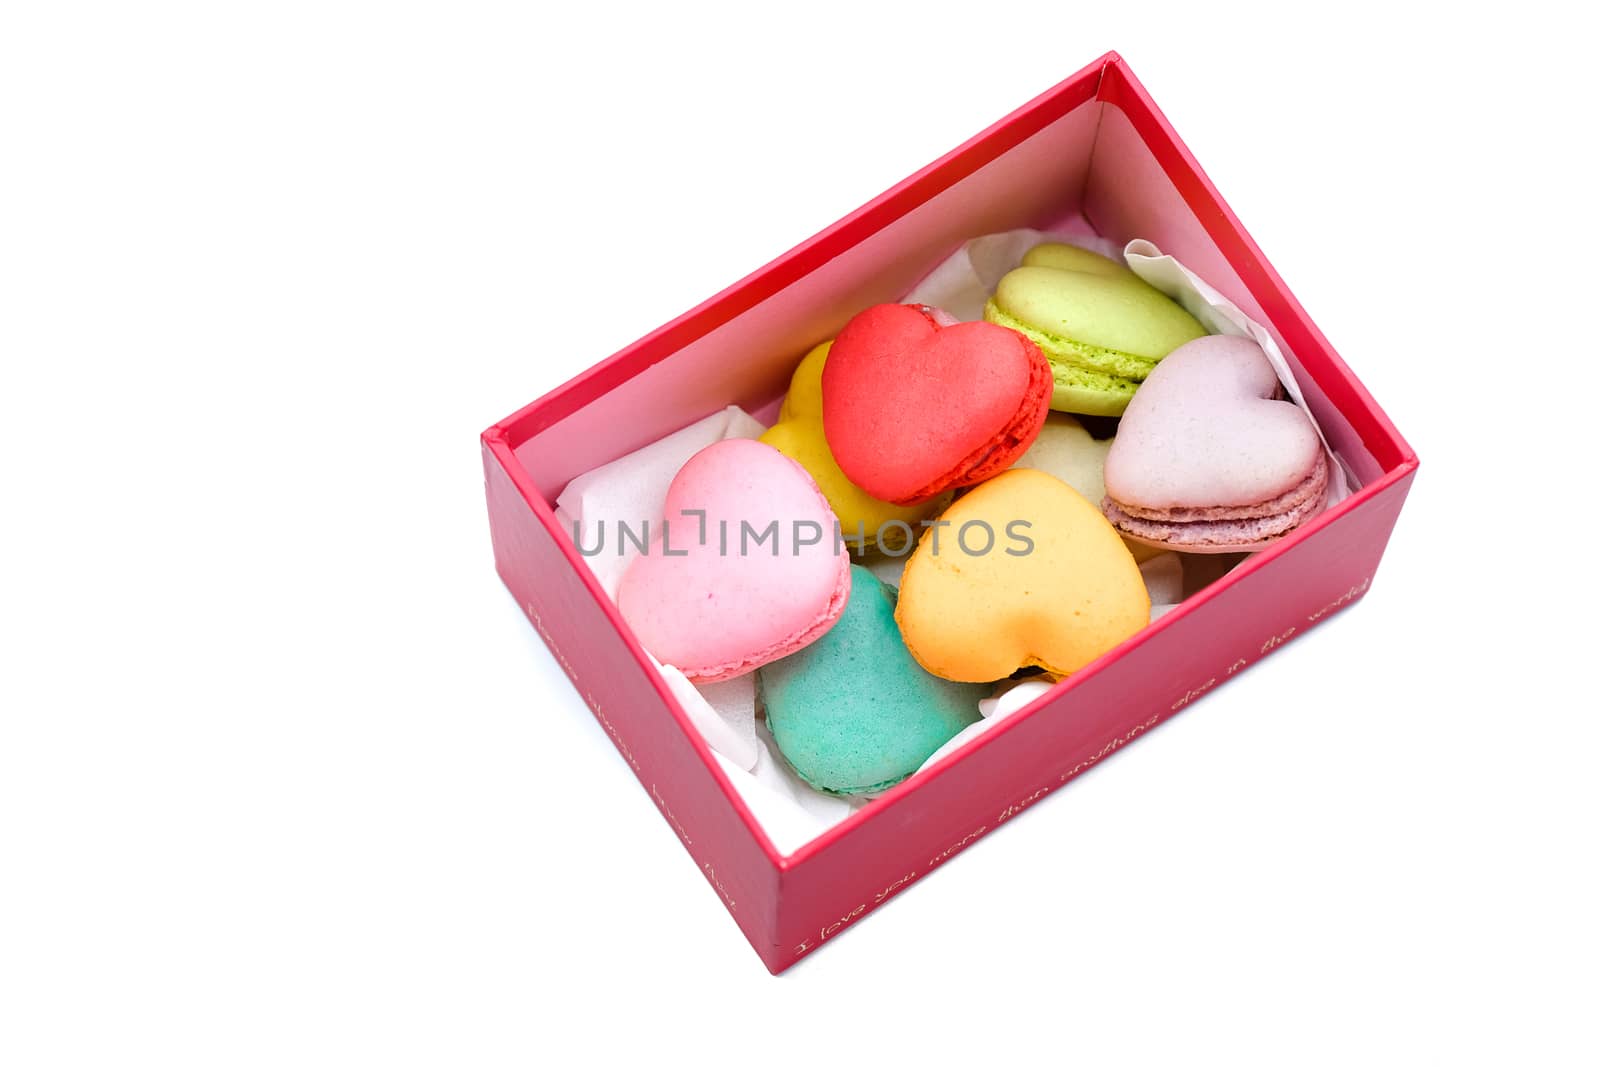 assortments of colorful macaroons in a red box by Nawoot